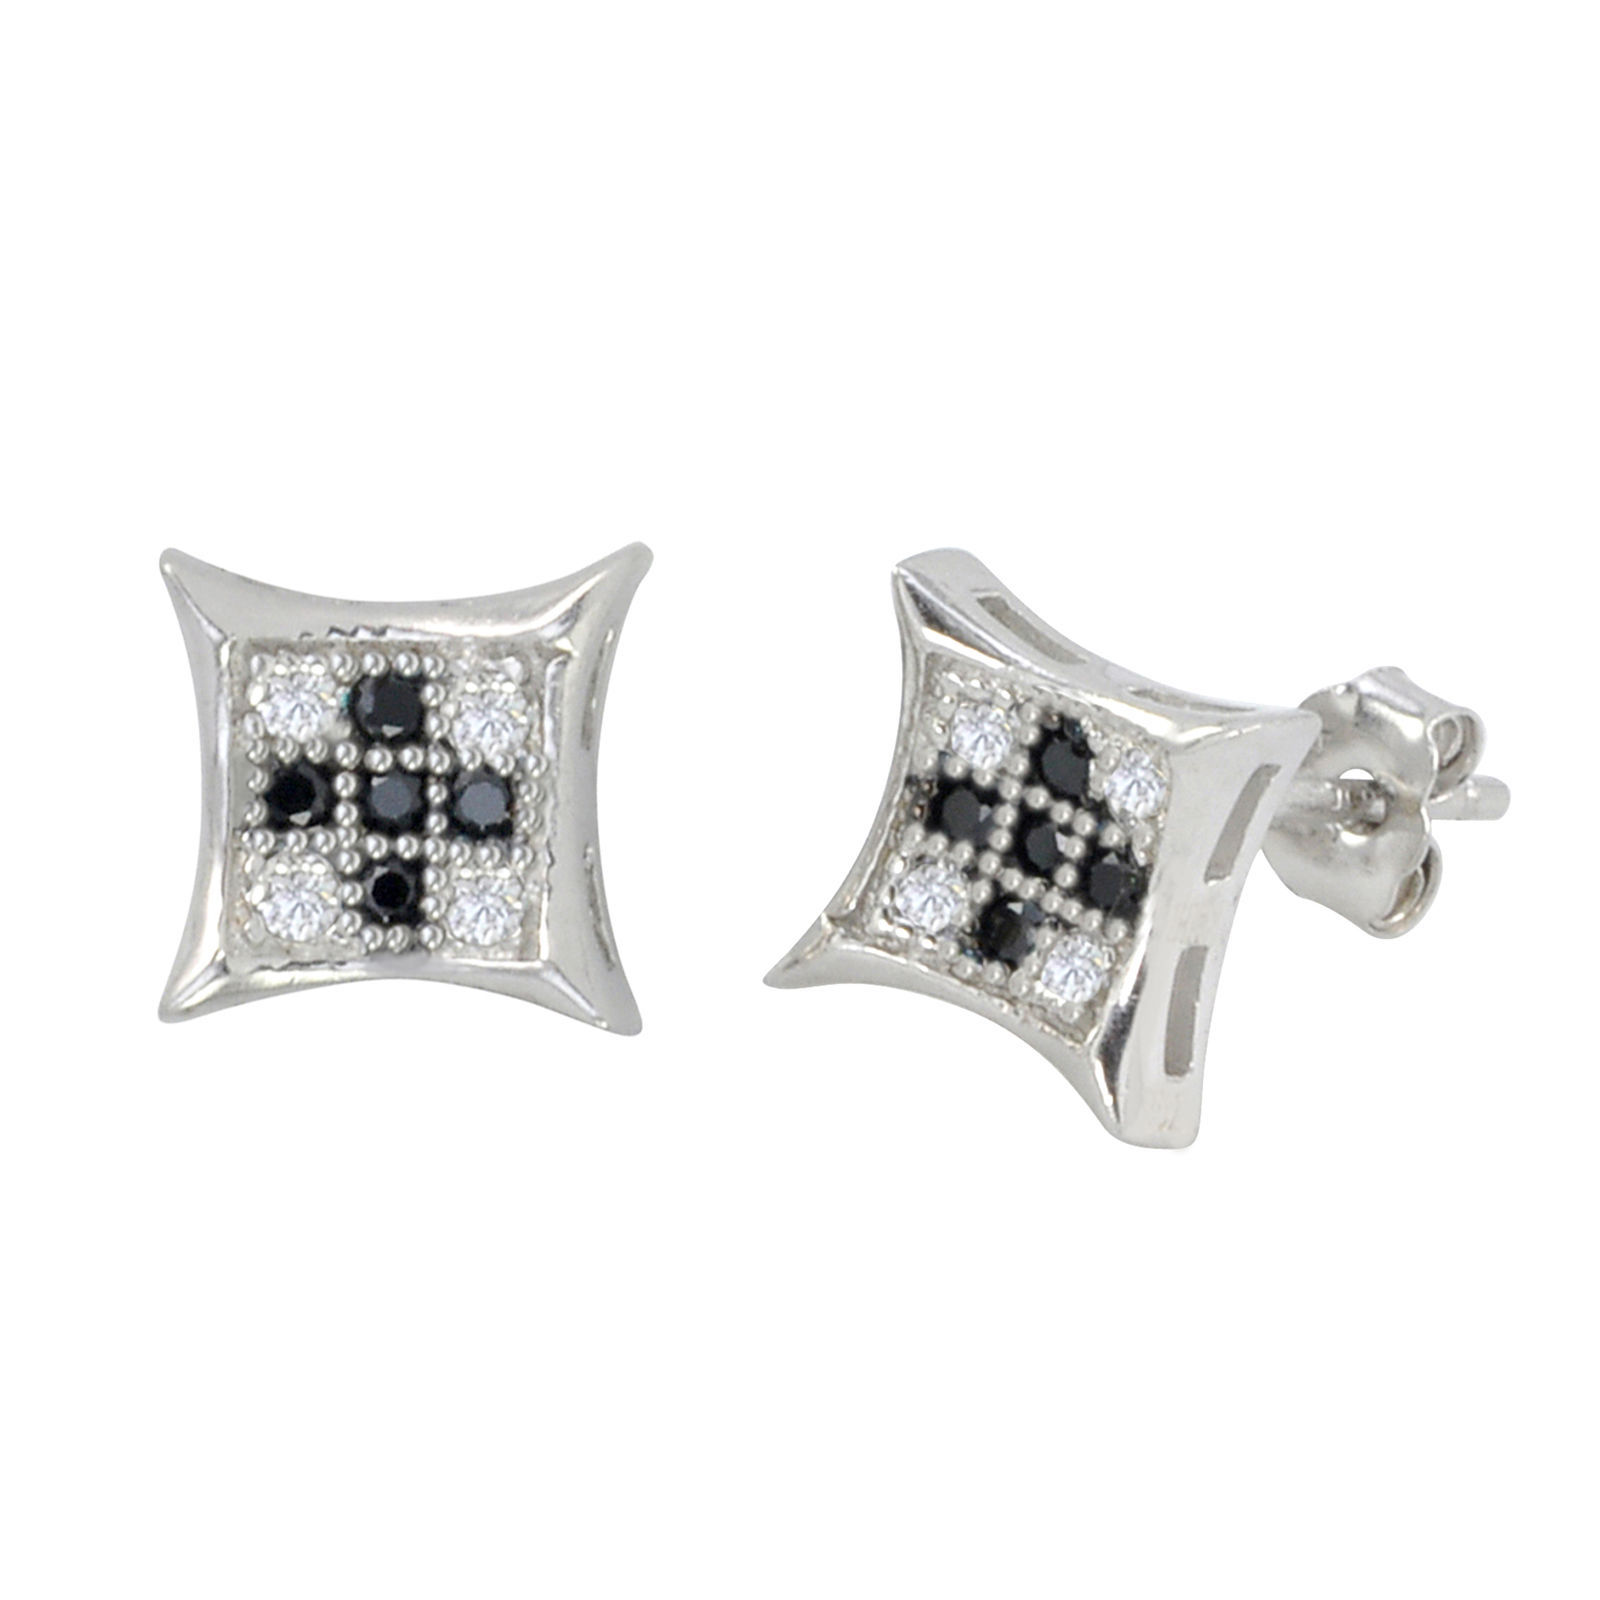 Primary image for Sterling Silver Micropave Stud Earrings Black and White Kite Shaped 8mm x 8mm